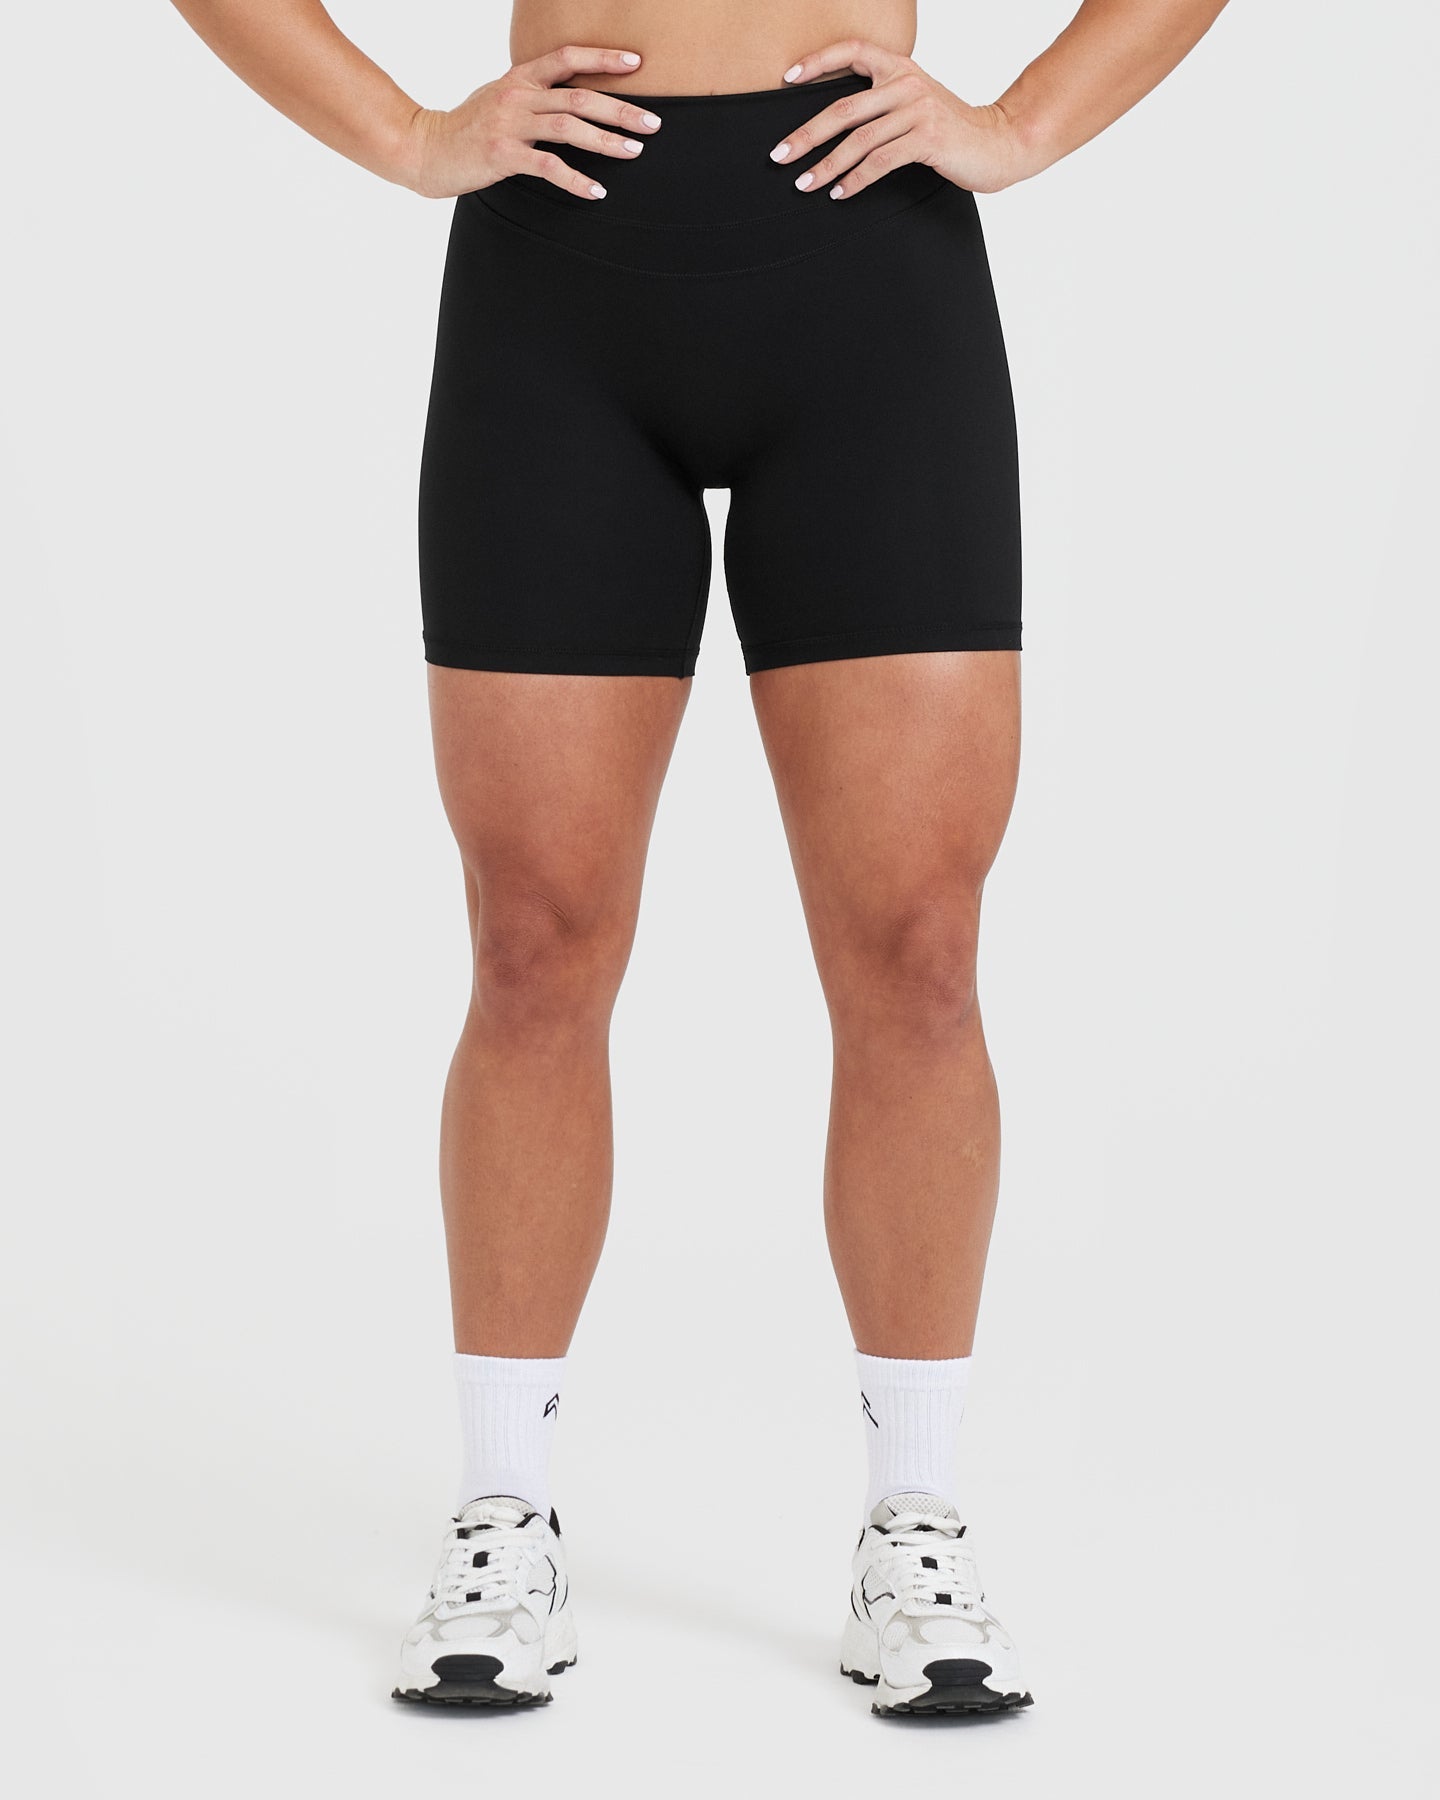 Extra Strong Compression Micron Shorts with High Waisted Tummy Control  Black XS